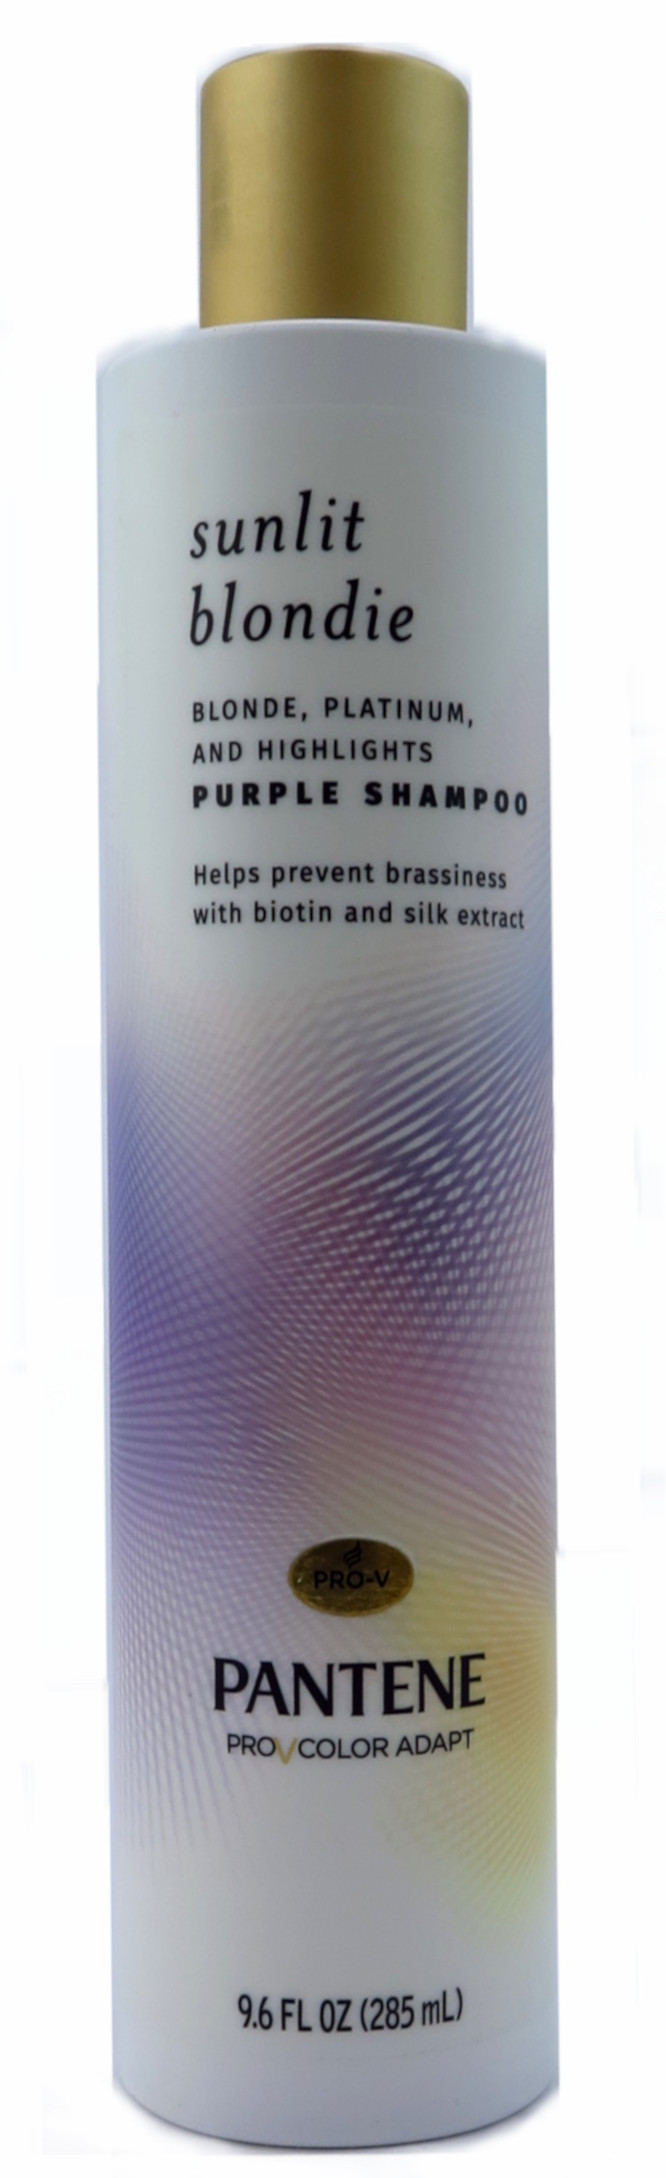 Pantene Sunlit Blondie Purple Shampoo, Toner For Blonde Hair for Color Treated Hair with Biotin and Silk Extract 9.6oz